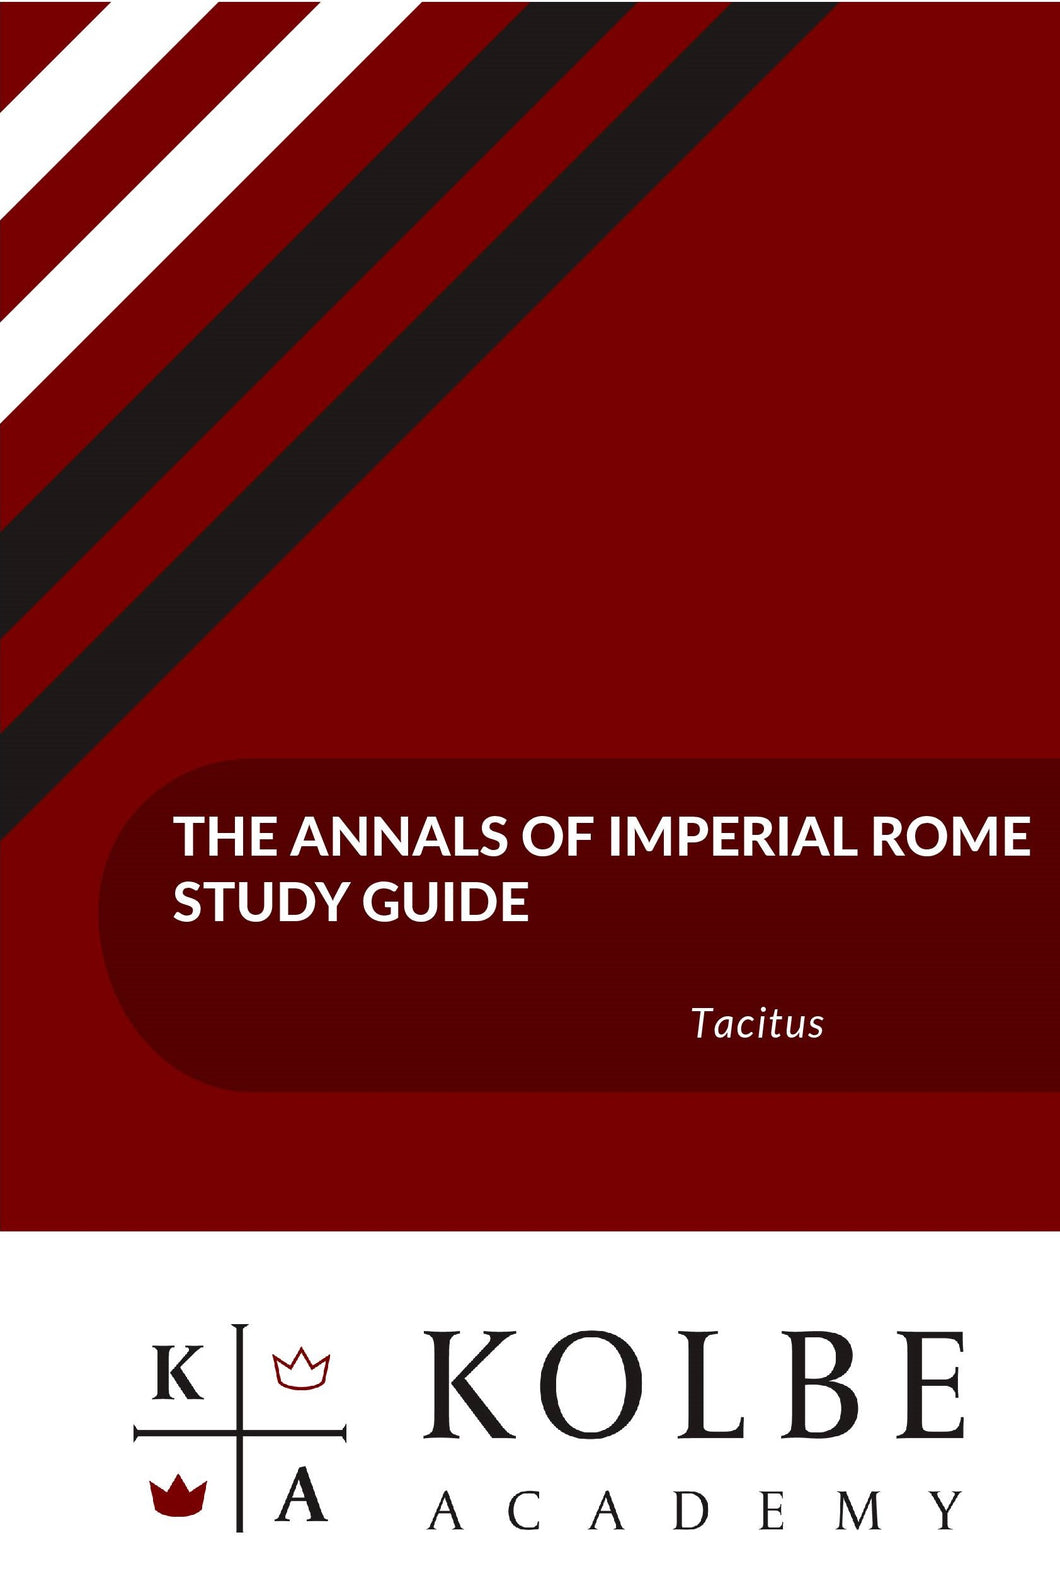 The Annals of Imperial Rome Study Guide